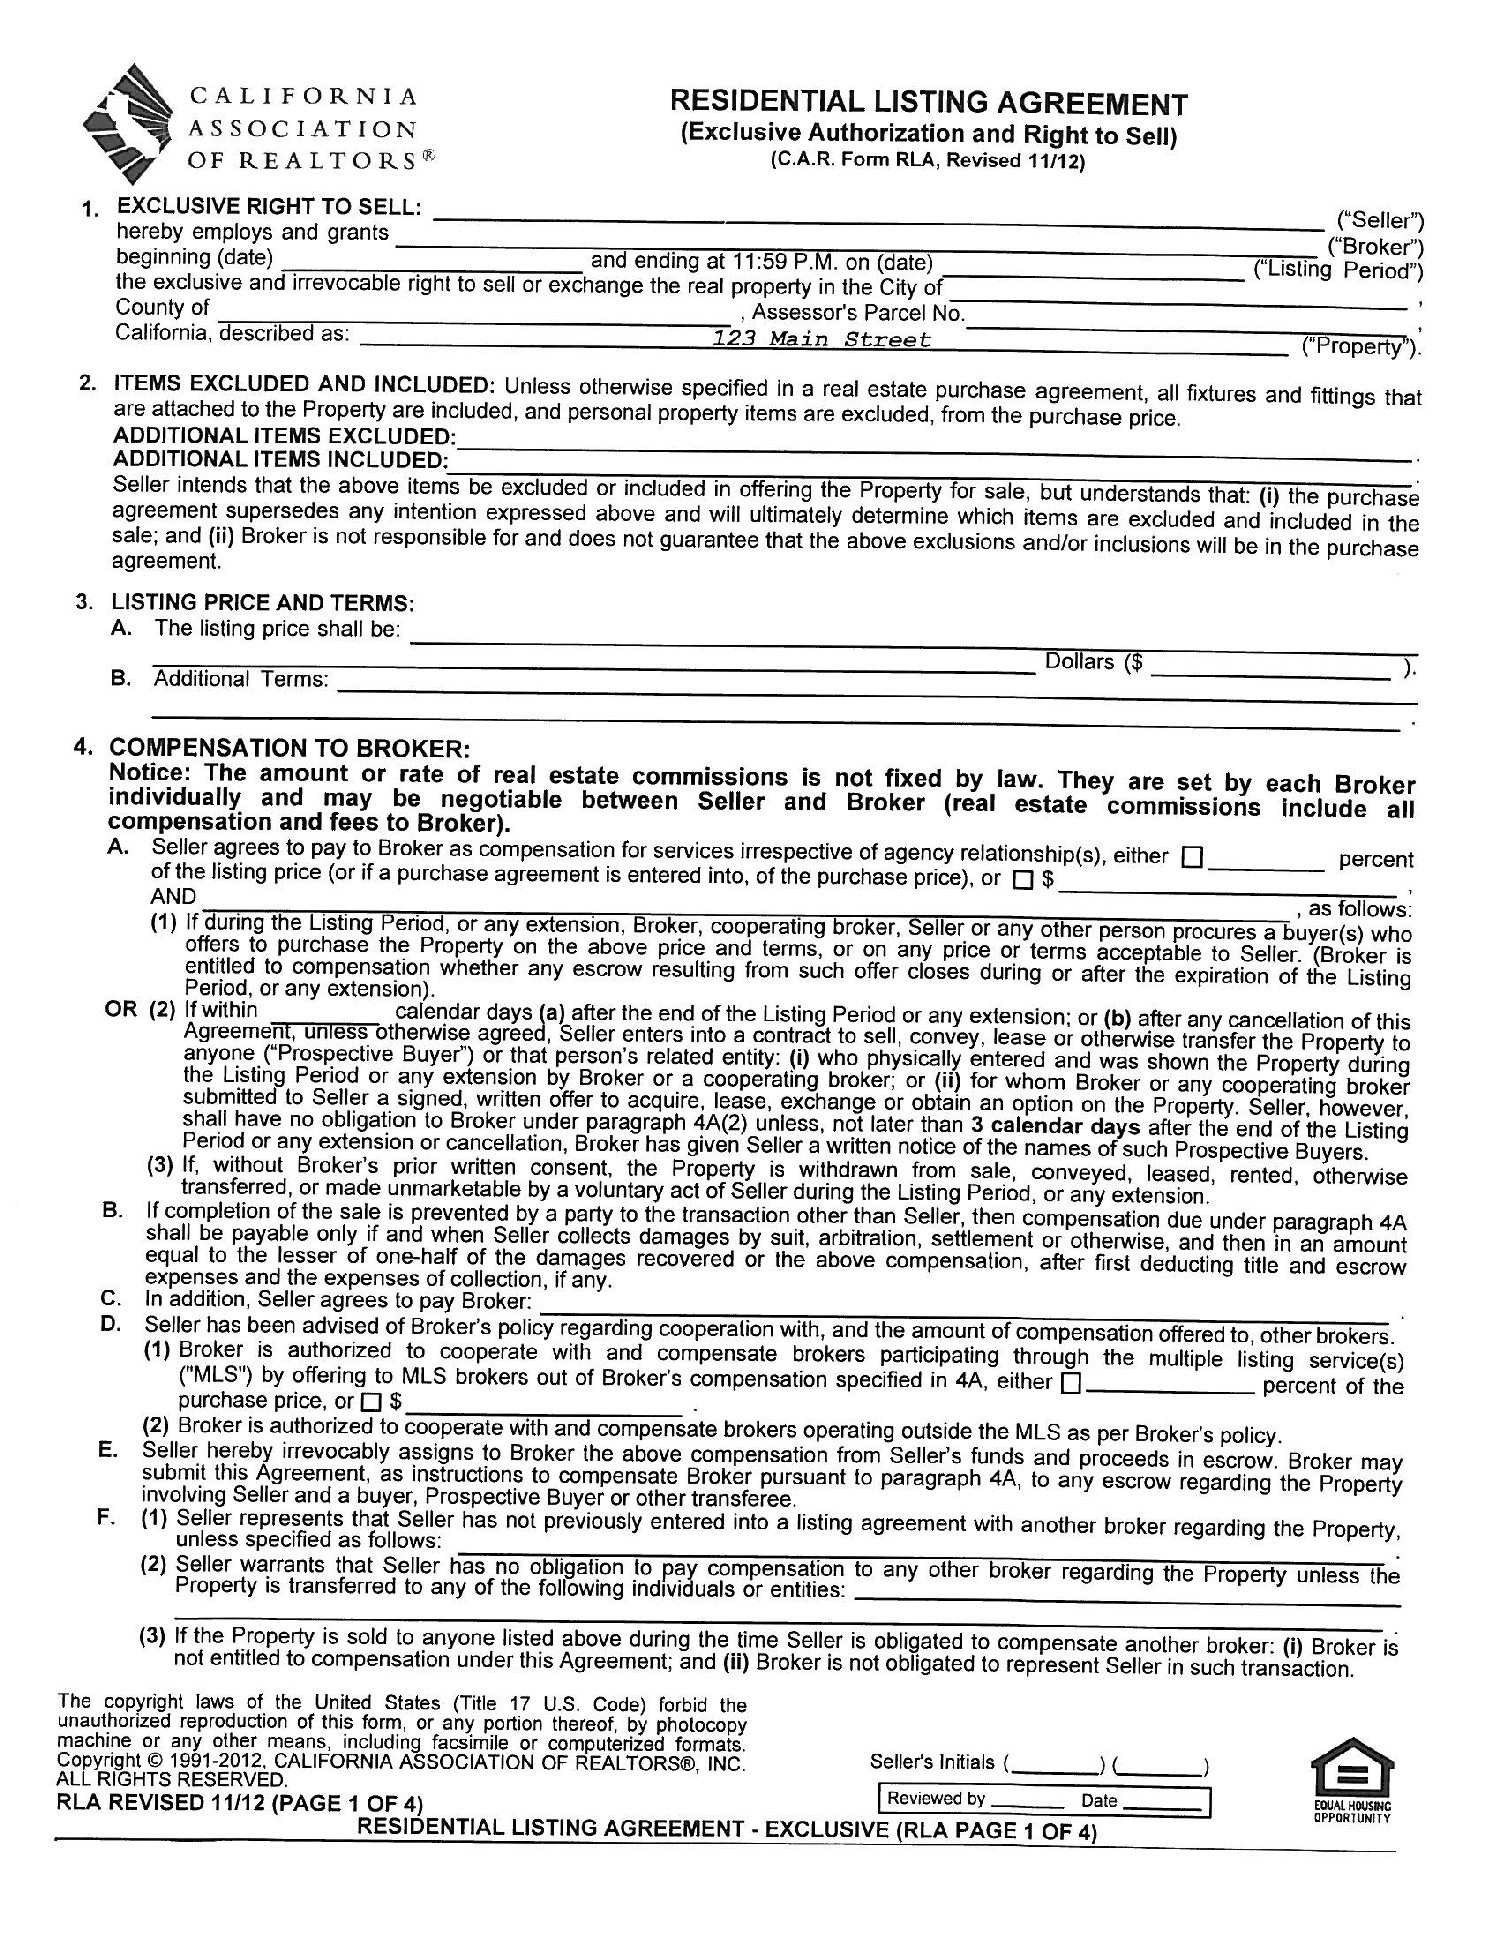 Real Estate Broker Employment Agreement Real Estate Employment Agreement 50989 Real Estate Broker Agreement